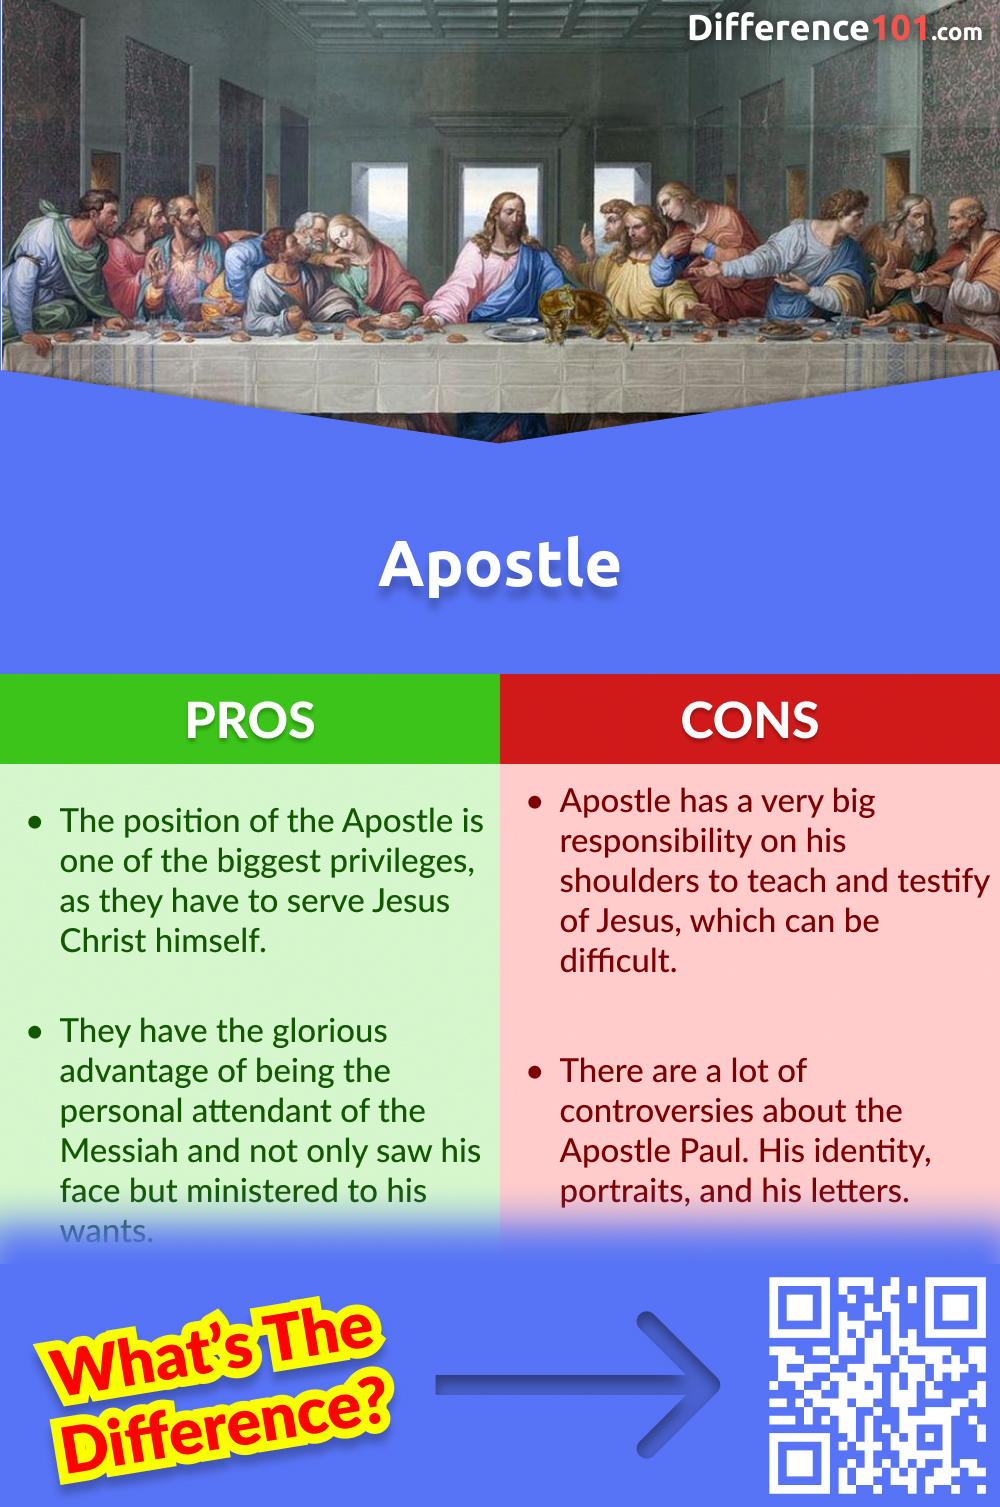 Apostle Pros and Cons